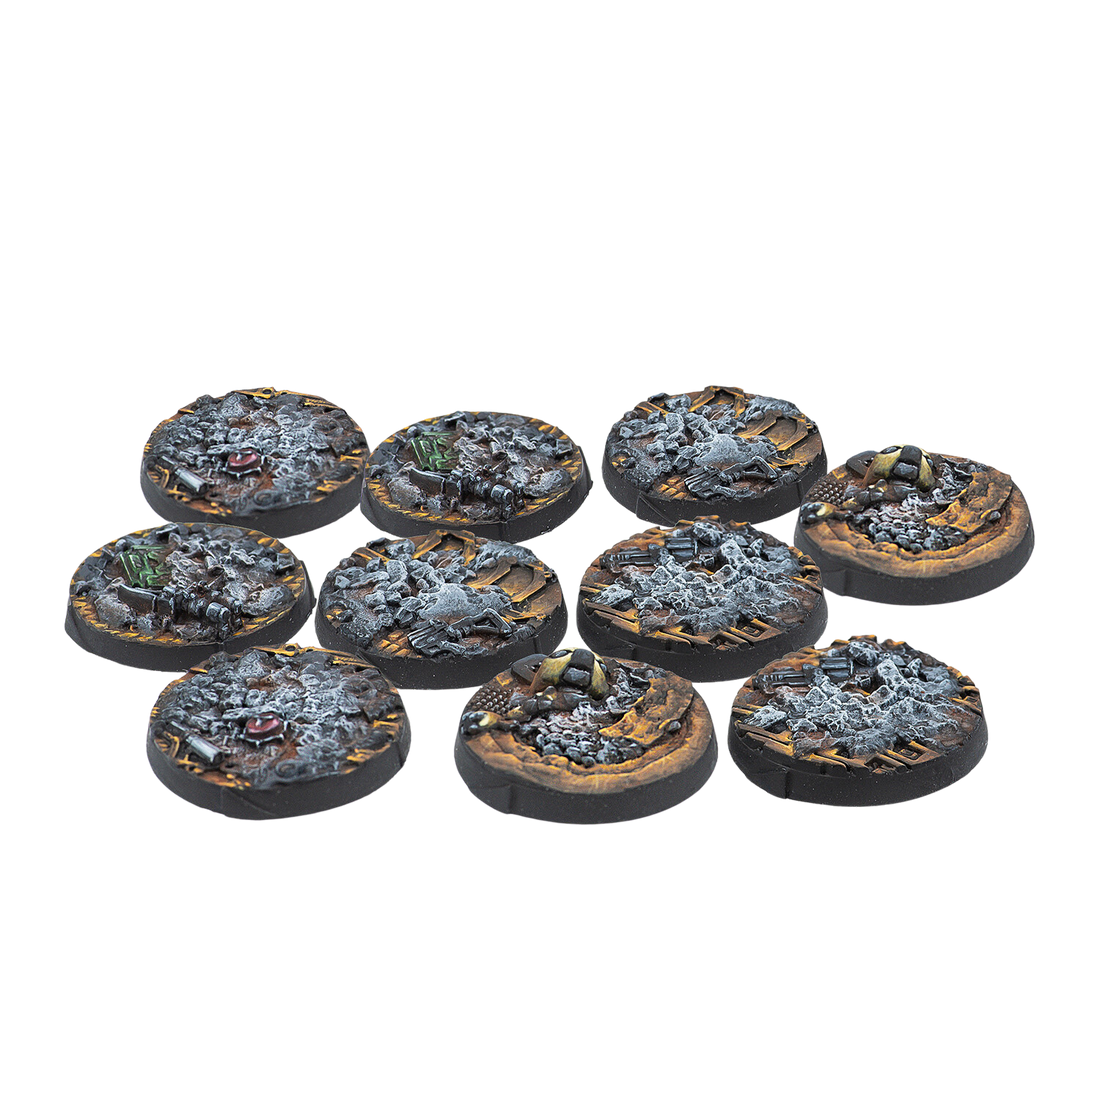 Infinity - 25mm Scenery Bases, Delta Series